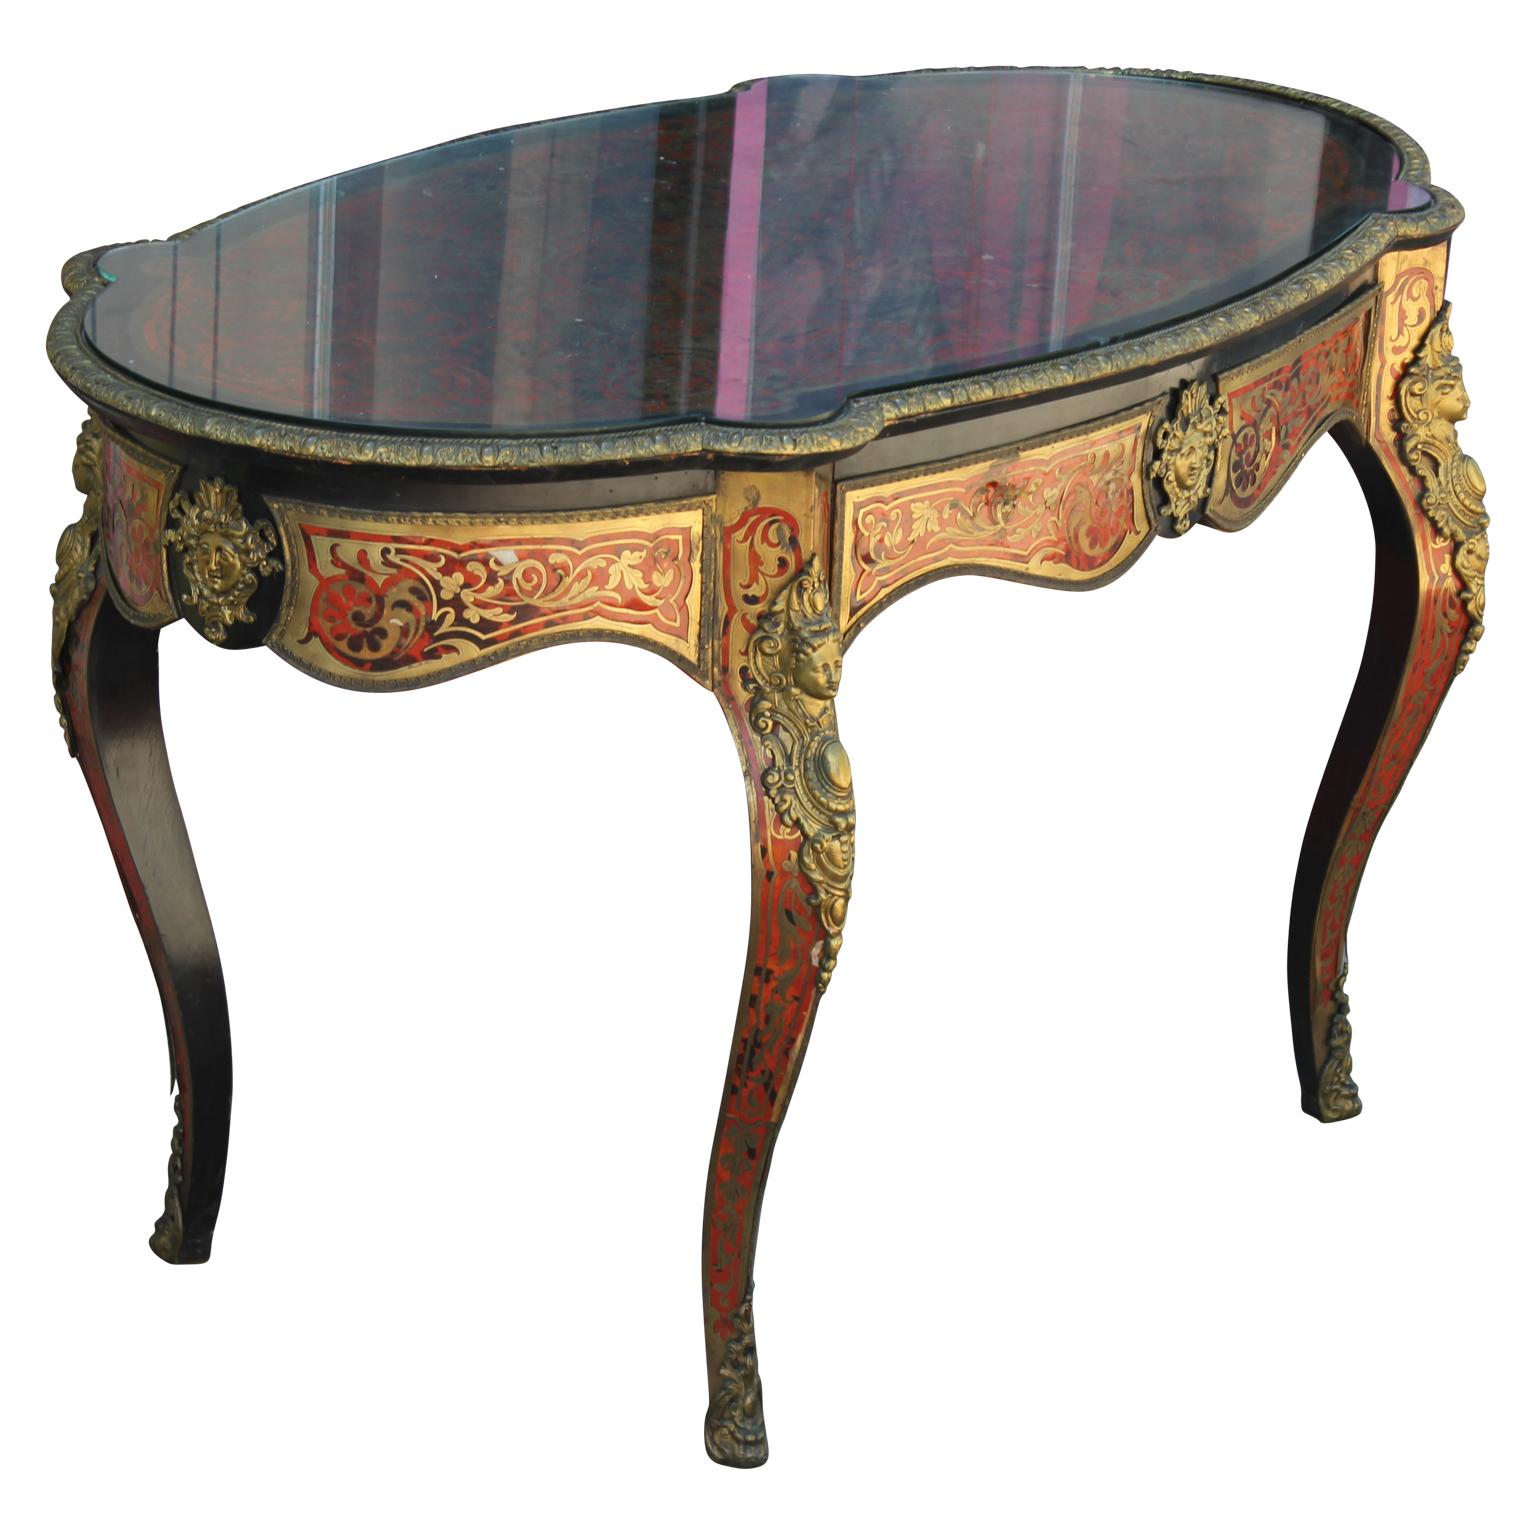 Wonderful and gorgeous 19th century serpentine shaped French Boulle desk with brass inlay. Rare and unique. There are losses to the brass and some imperfections.